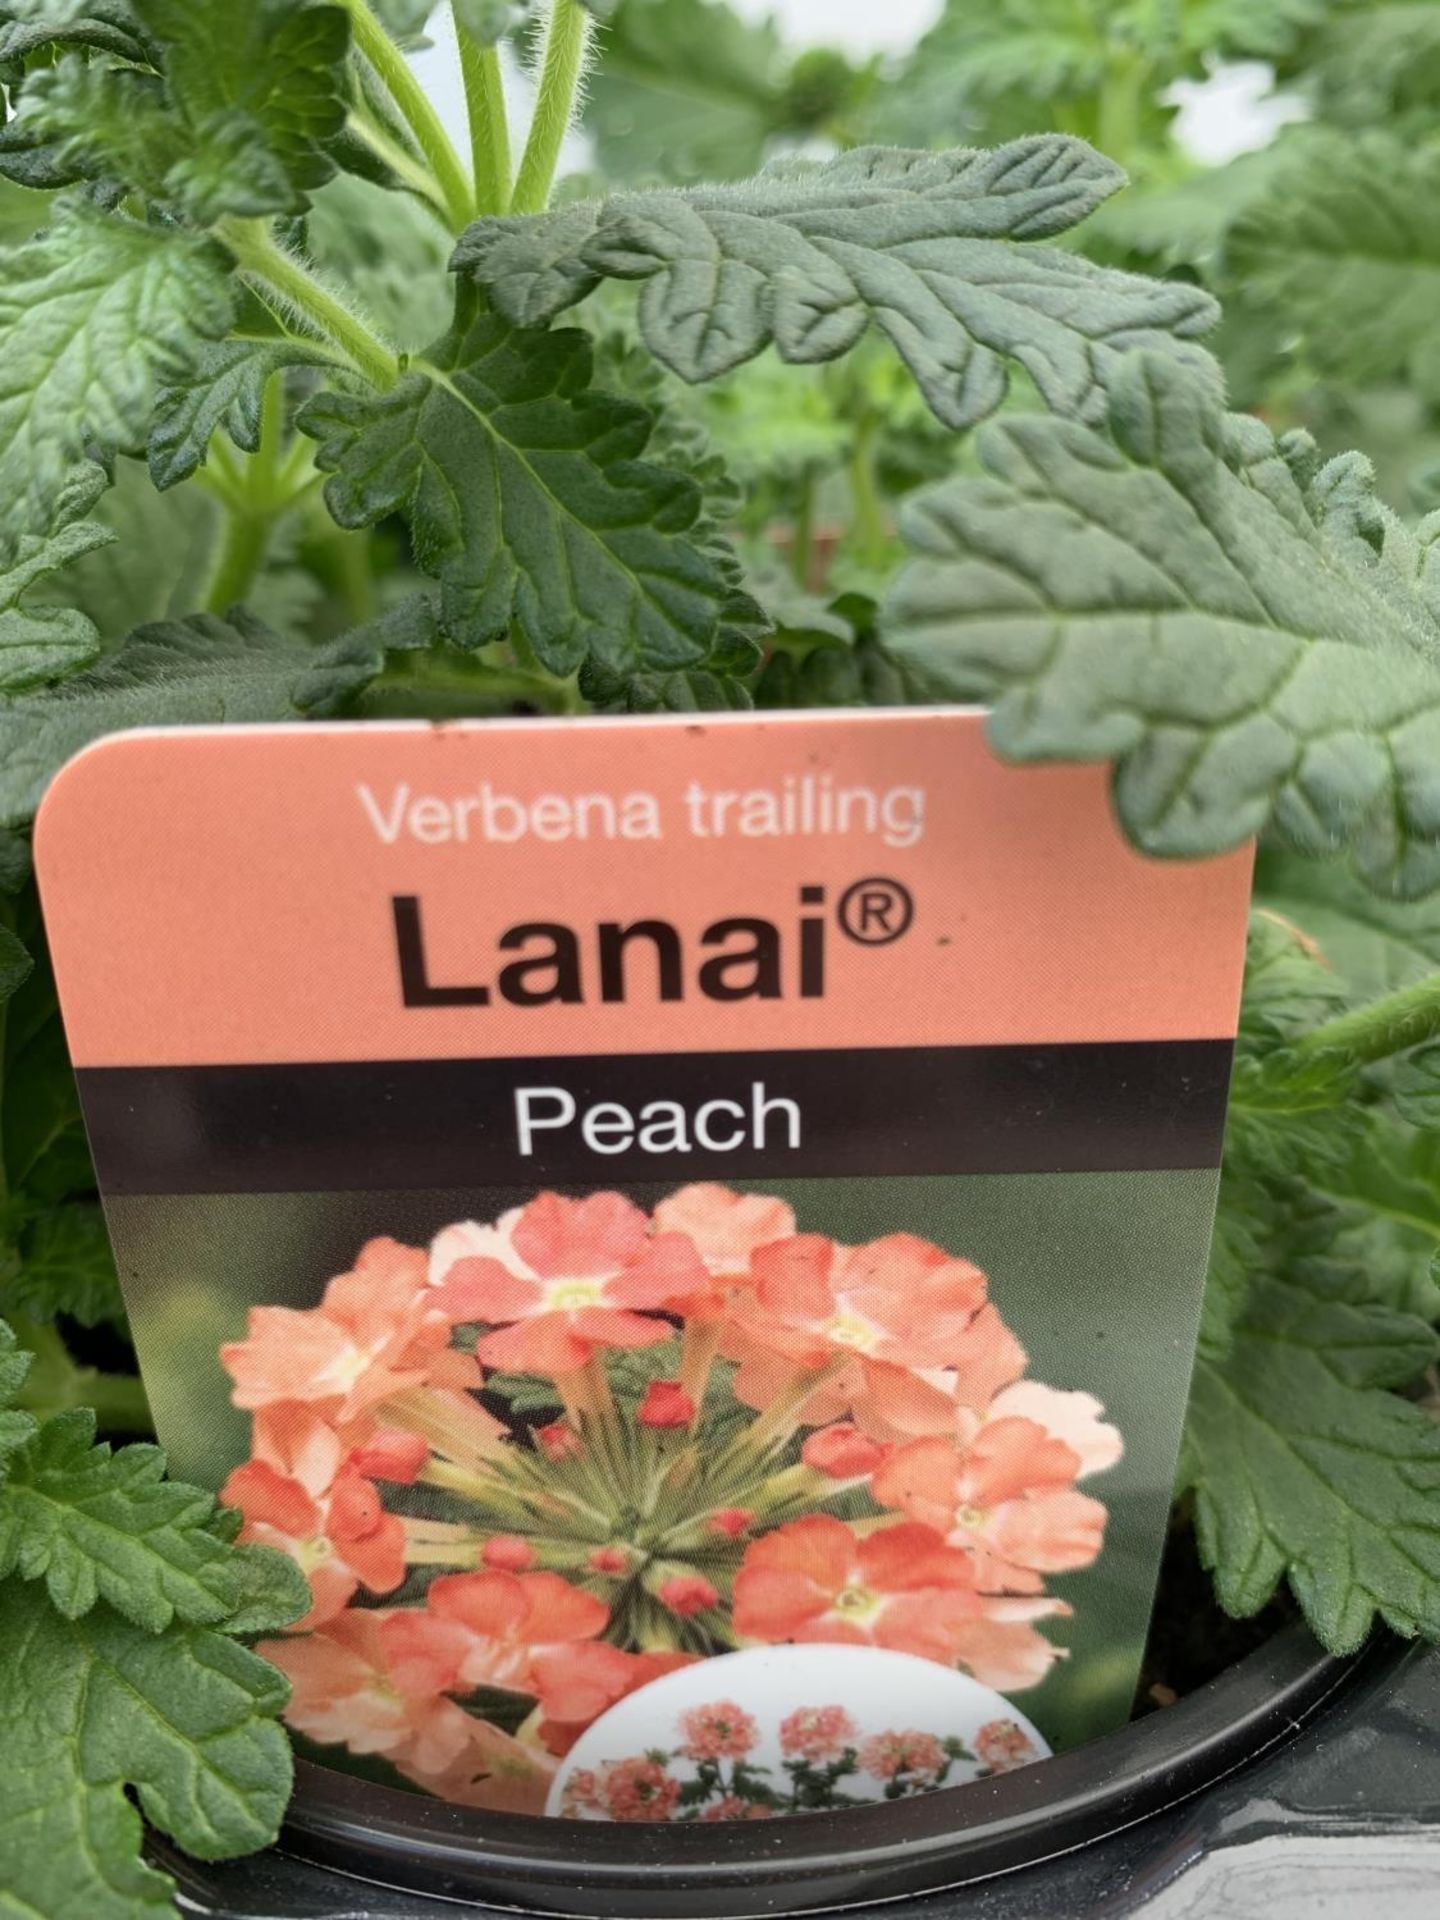 FIFTEEN TRAILING VERBENA LANAI IN PEACH BASKET PLANTS IN P9 POTS PLUS VAT TO BE SOLD FOR THE FIFTEEN - Image 4 of 4